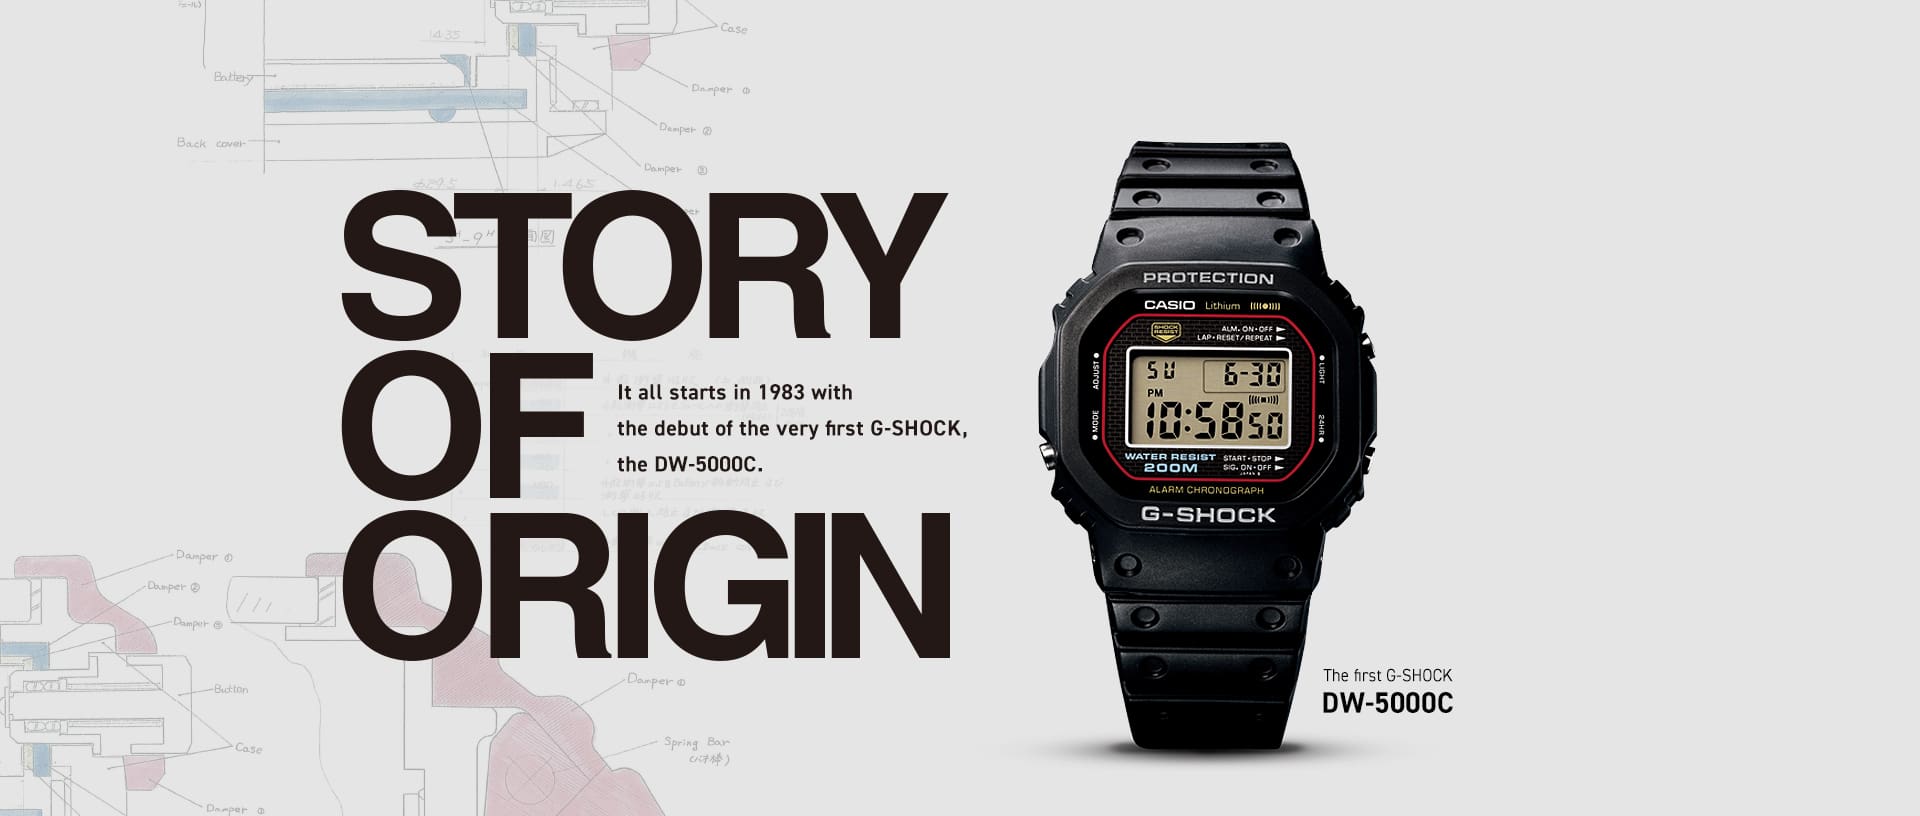 STORY OF ORIGIN for the DW5000C 1983 watch